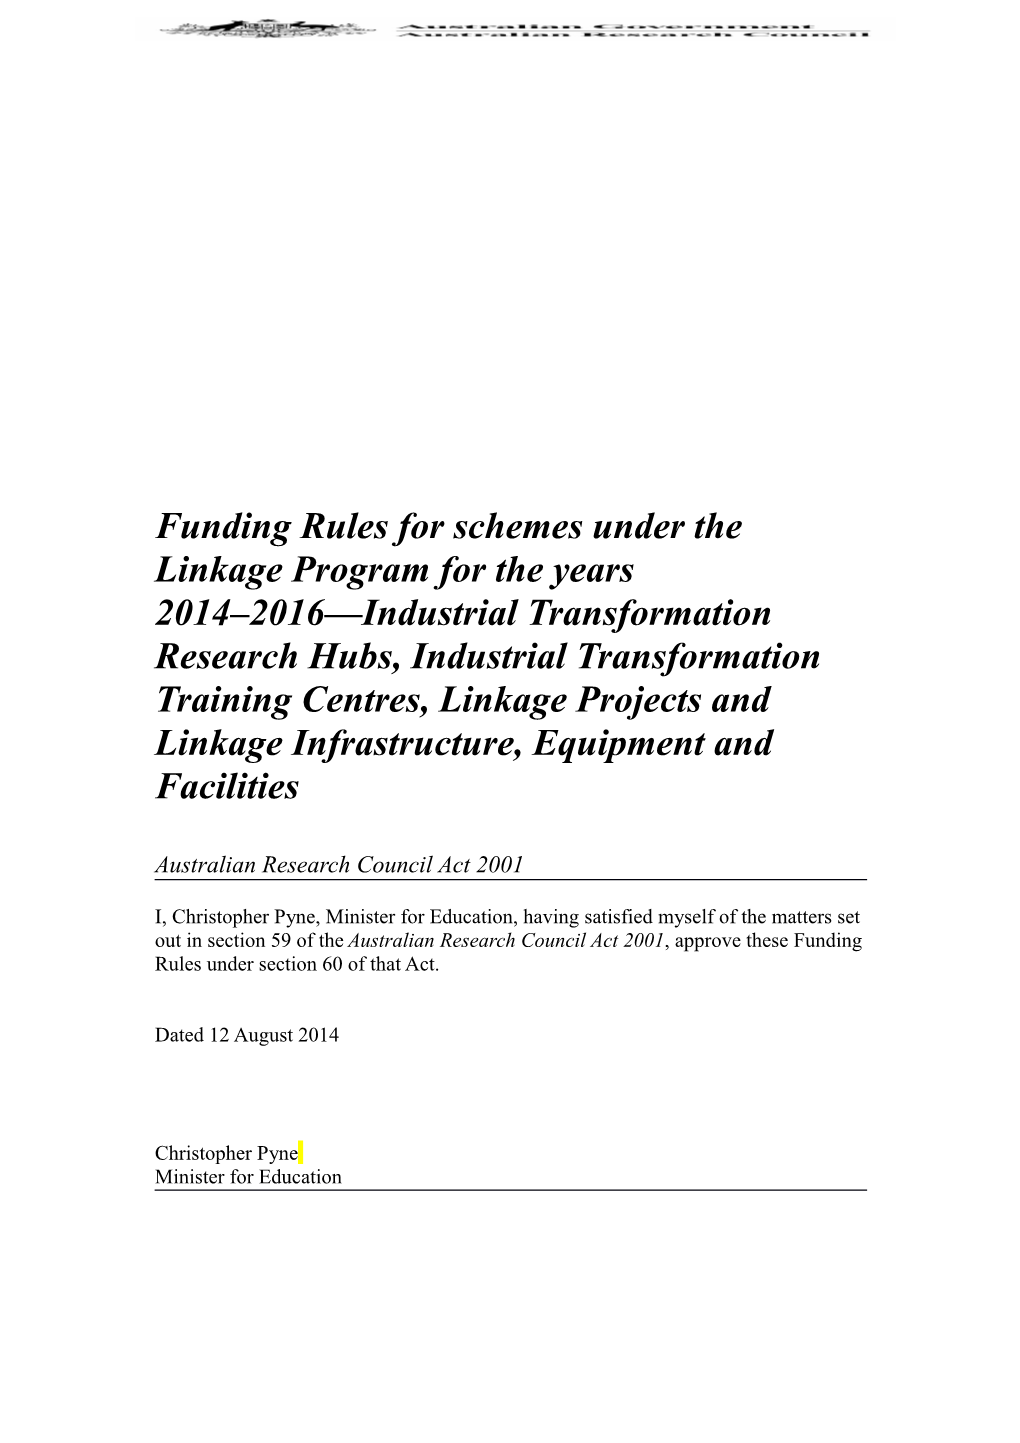 Funding Rules for Schemes Under Thelinkage Programfor the Years 2014 2016 Industrial